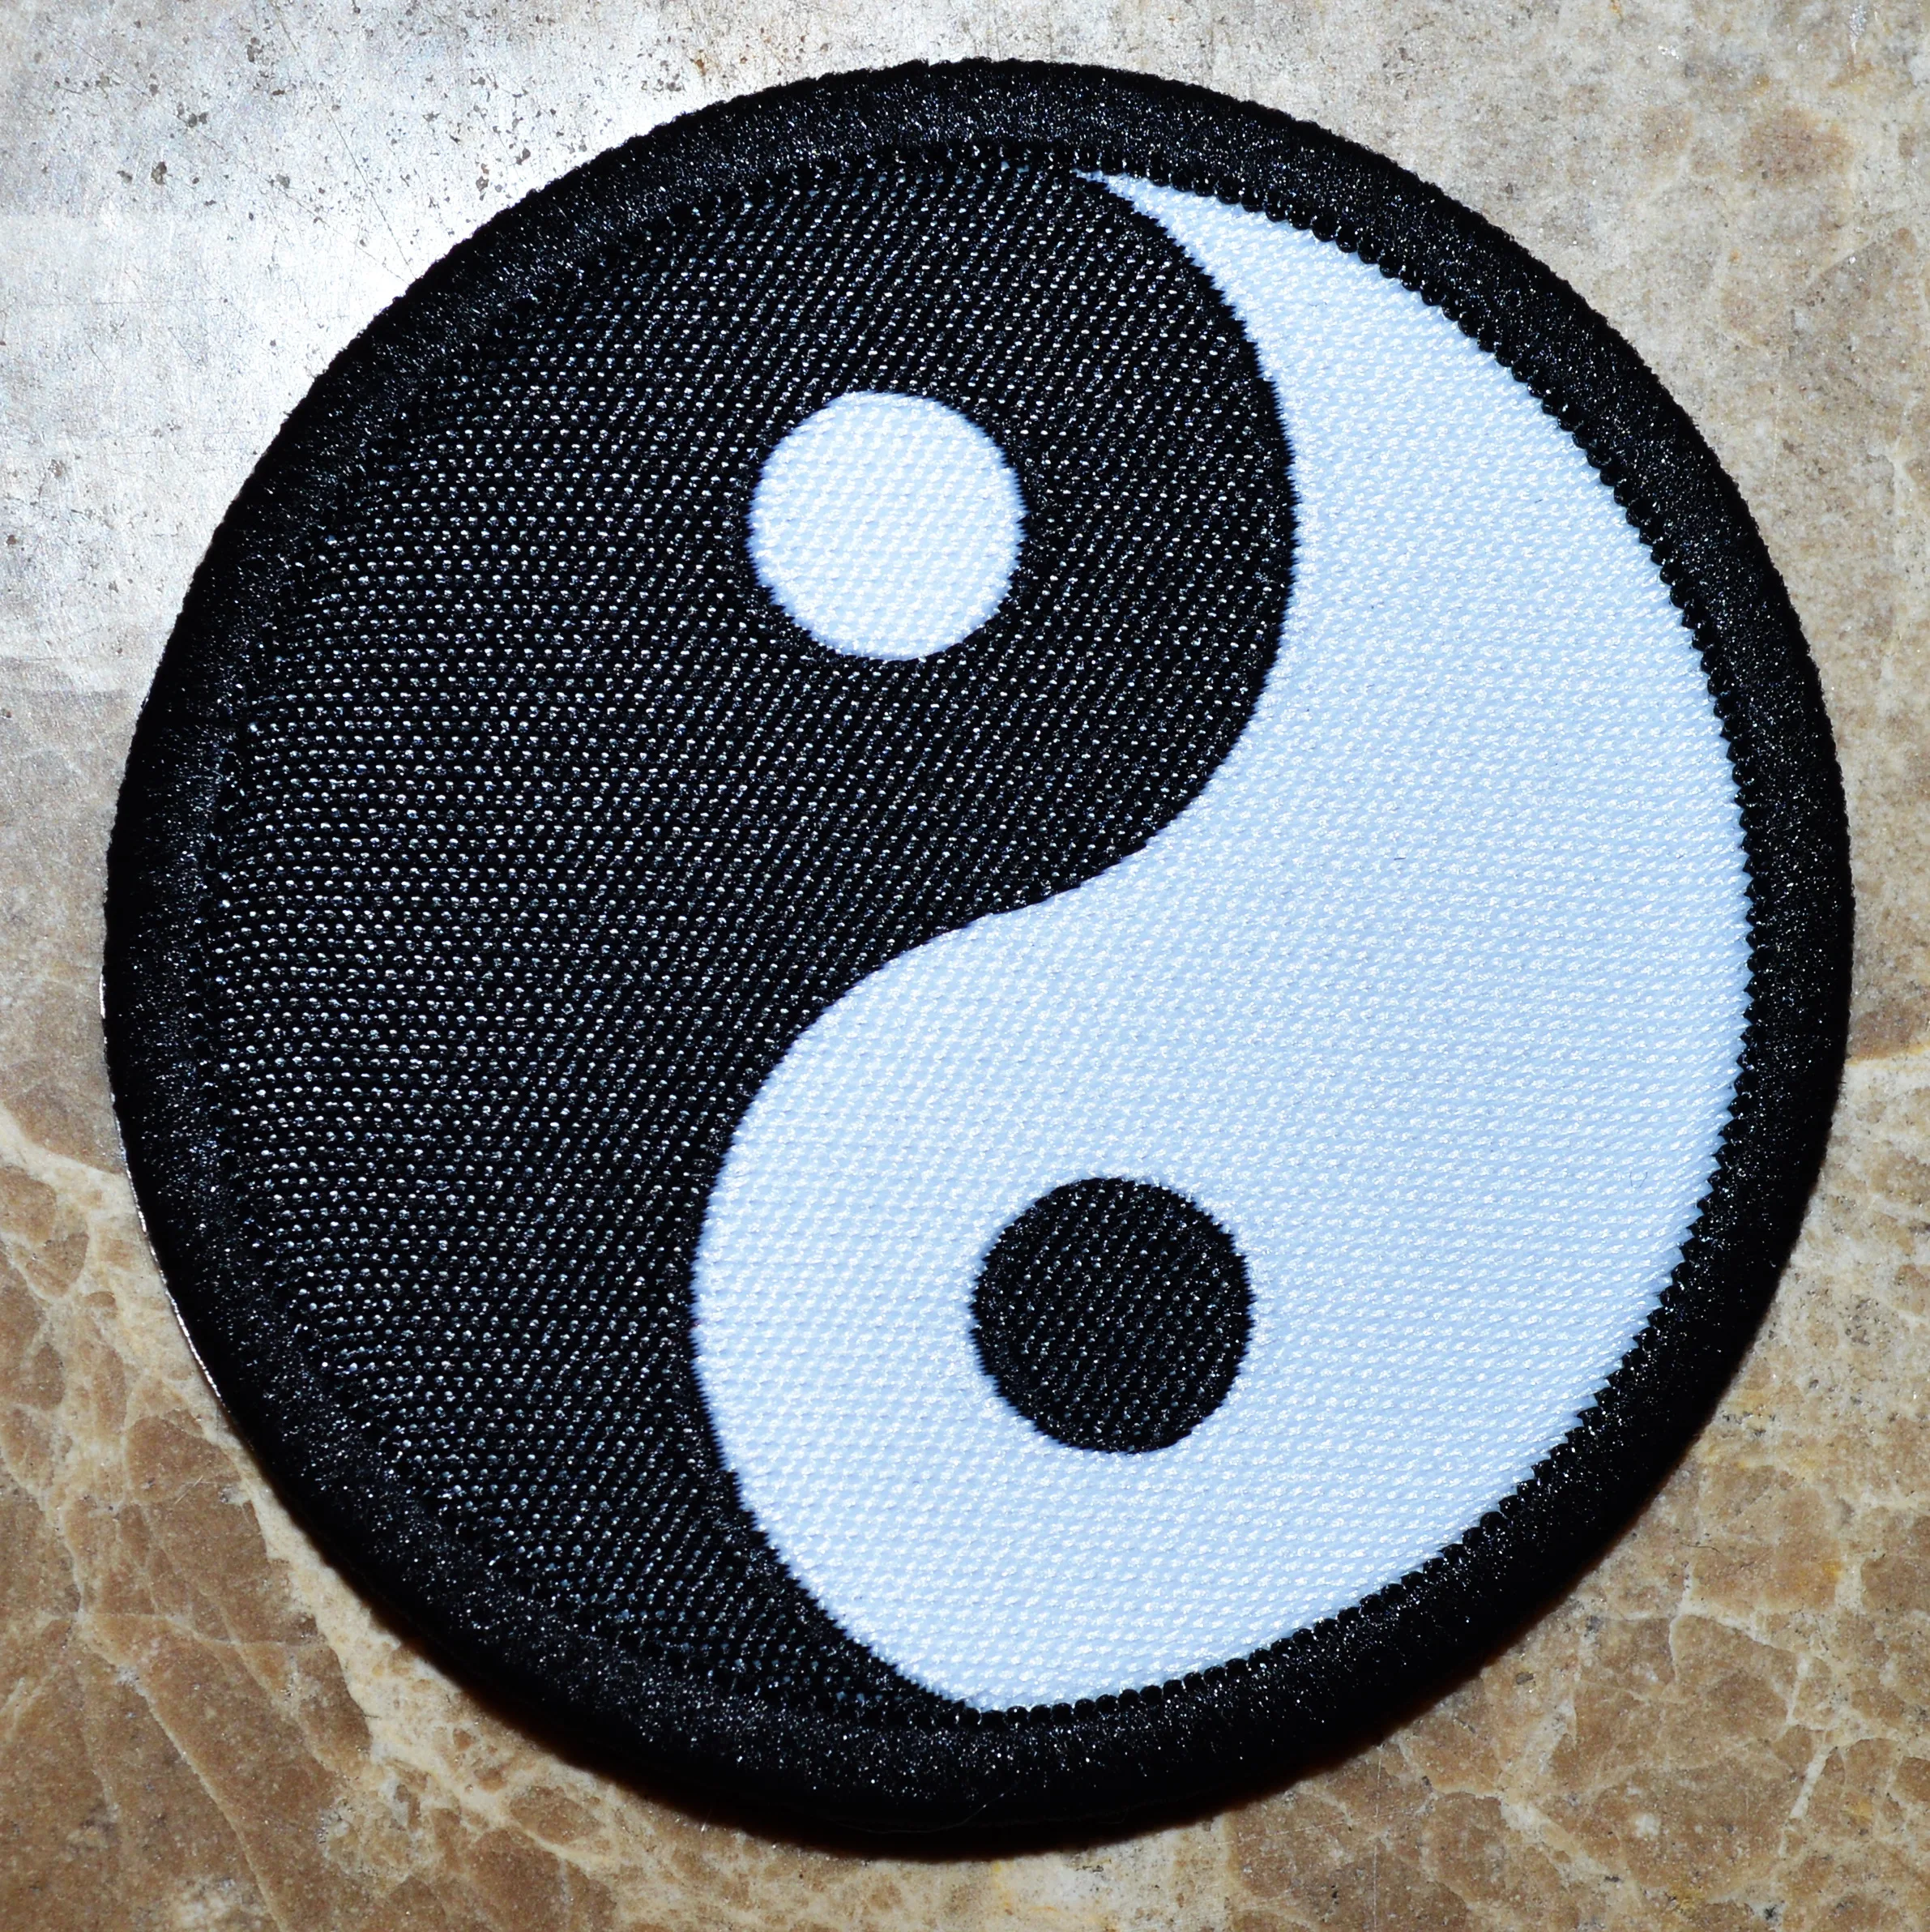 

YIN YANG karate embroidered Iron on Patches Sew on Applique ying tai chi MARTIAL ARTS applique NEW